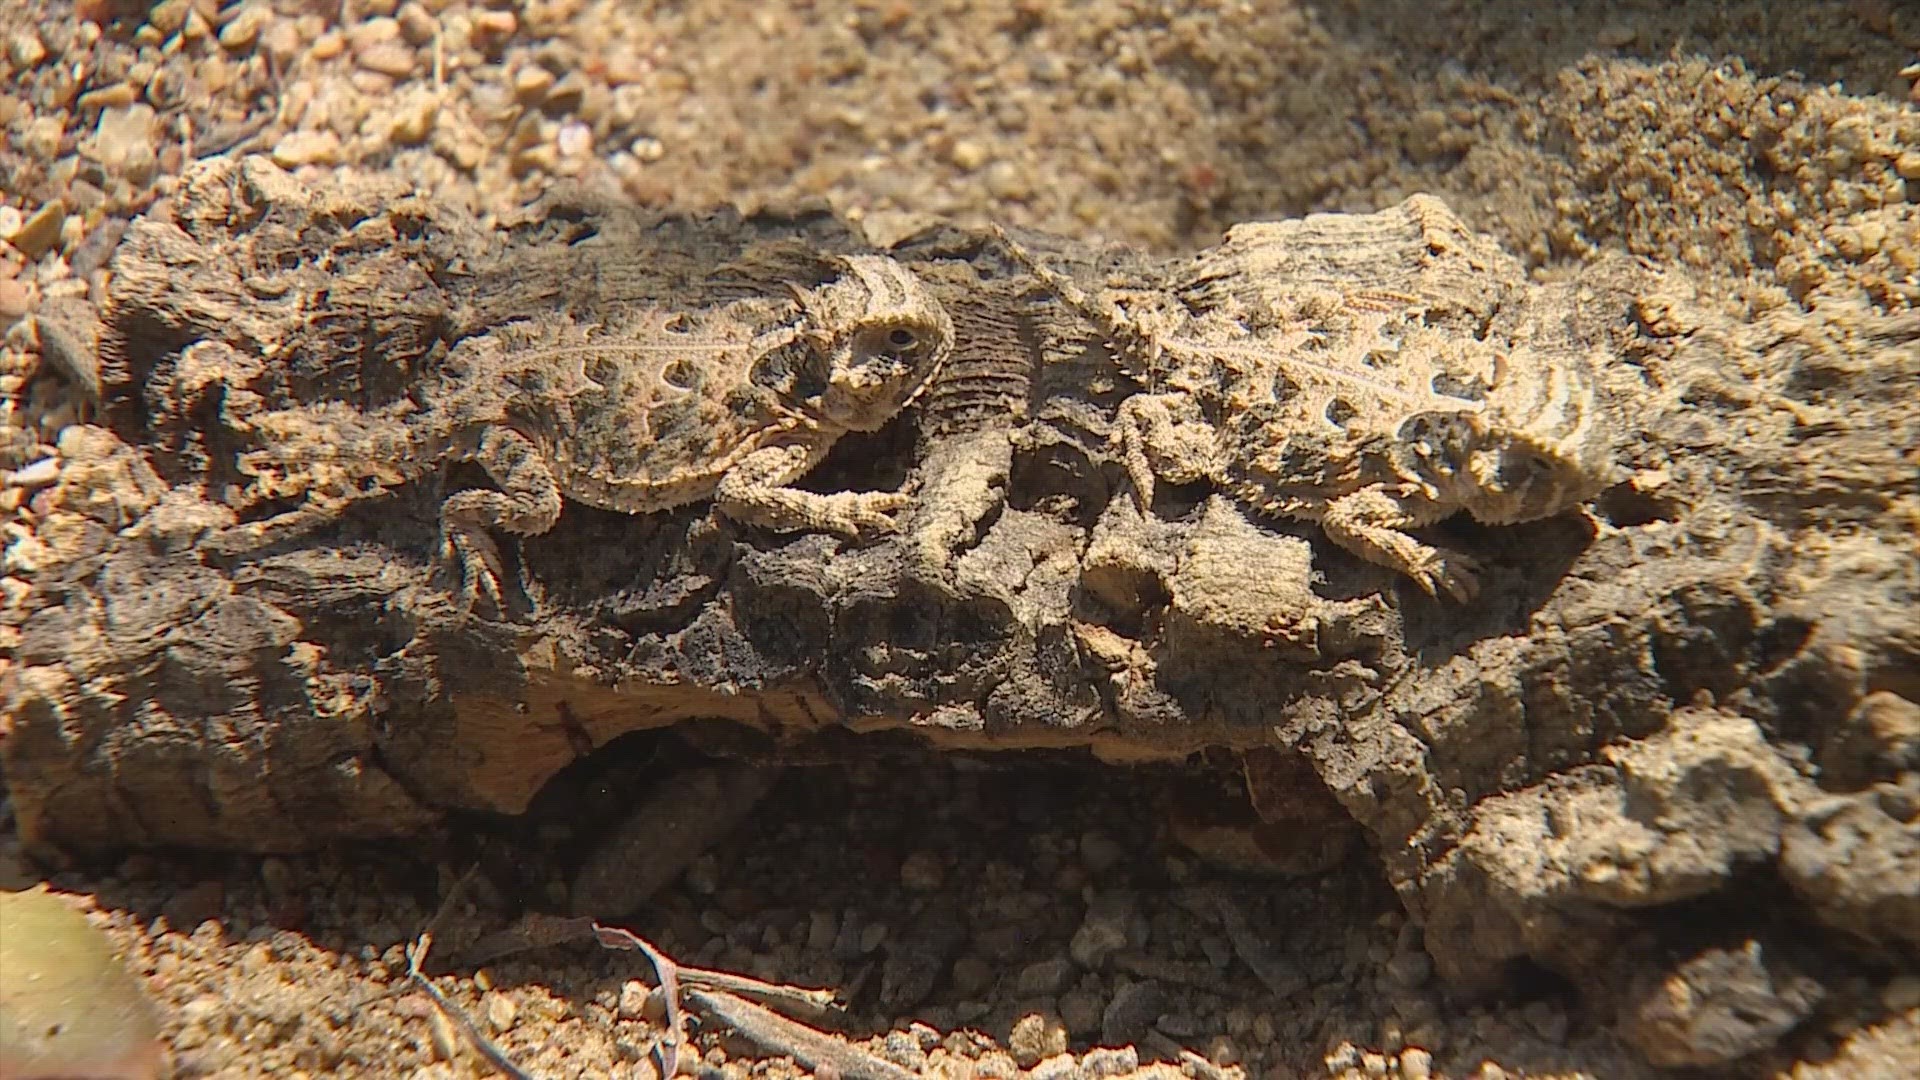 The Horned Lizard is a threatened in animal in the state of Texas where its populations have been declining in recent years.